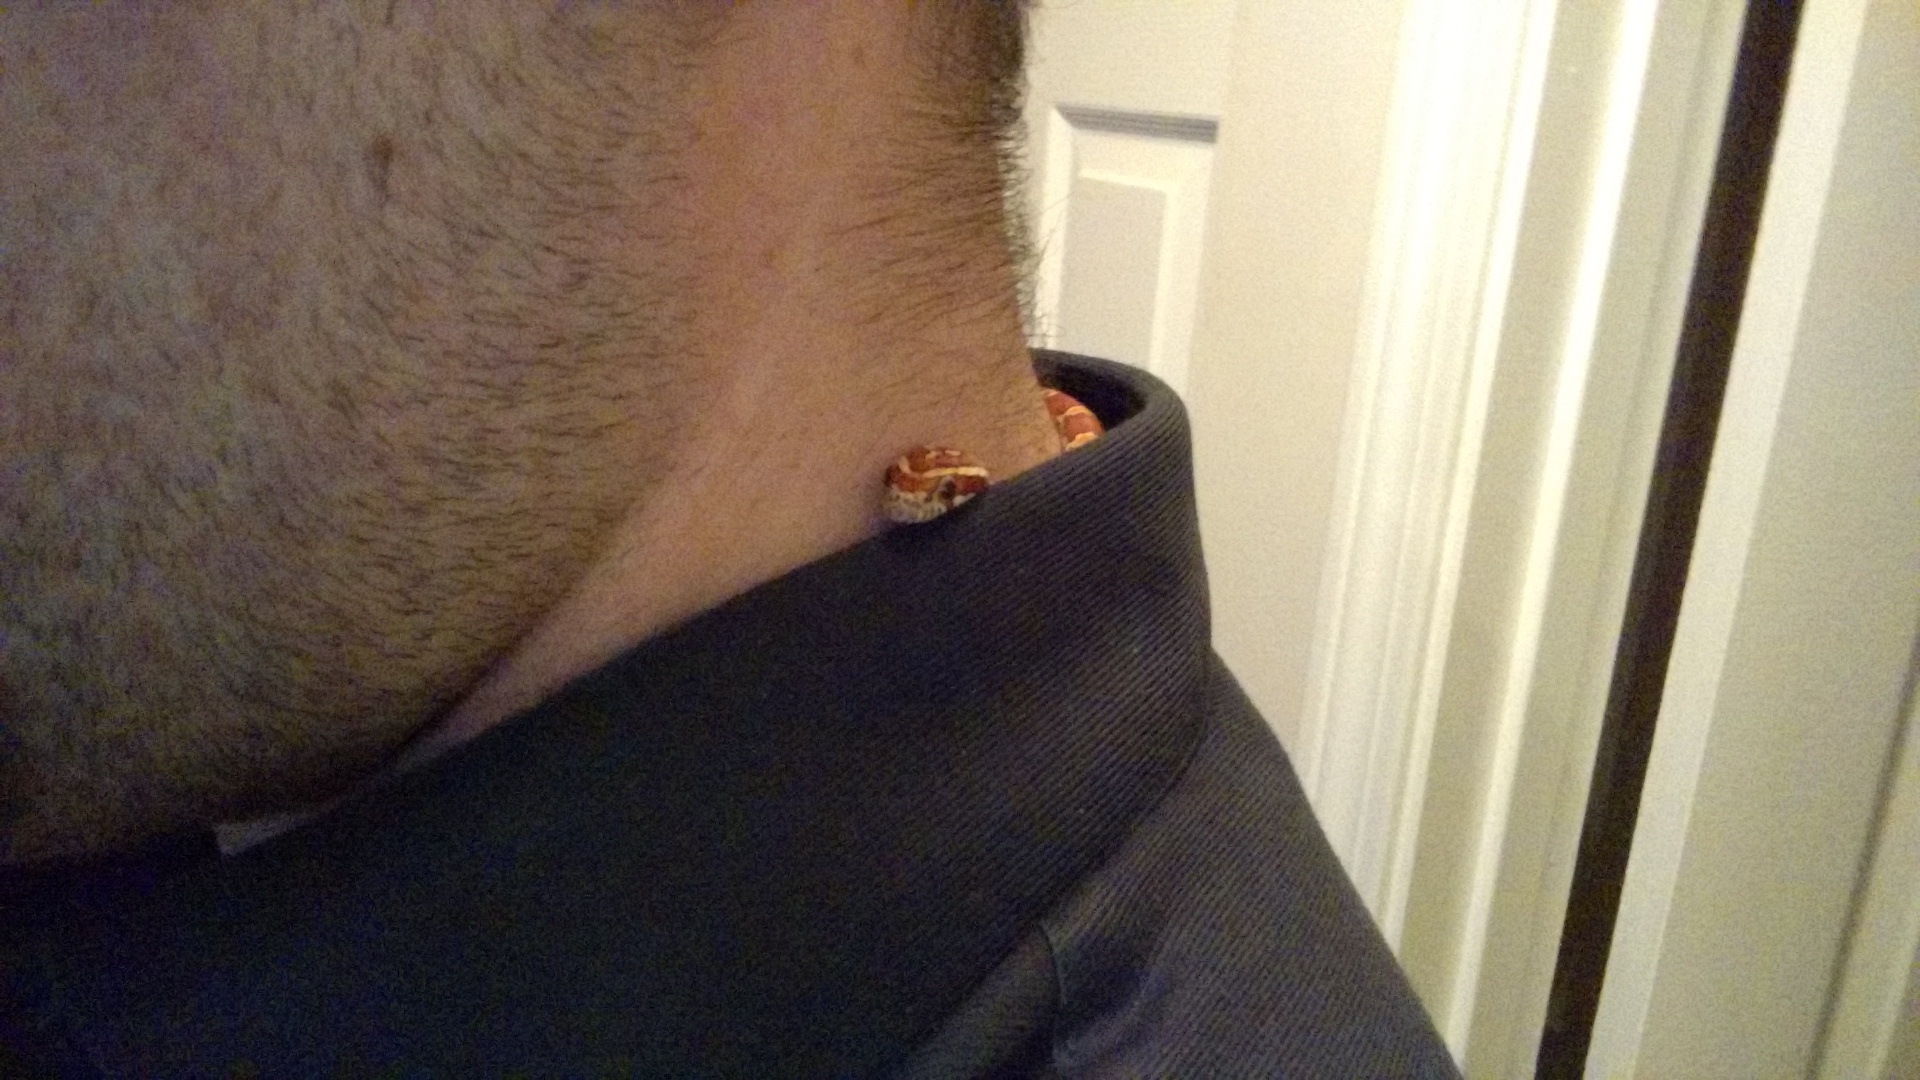 Adorable little snake that is hiding in a mans collar.